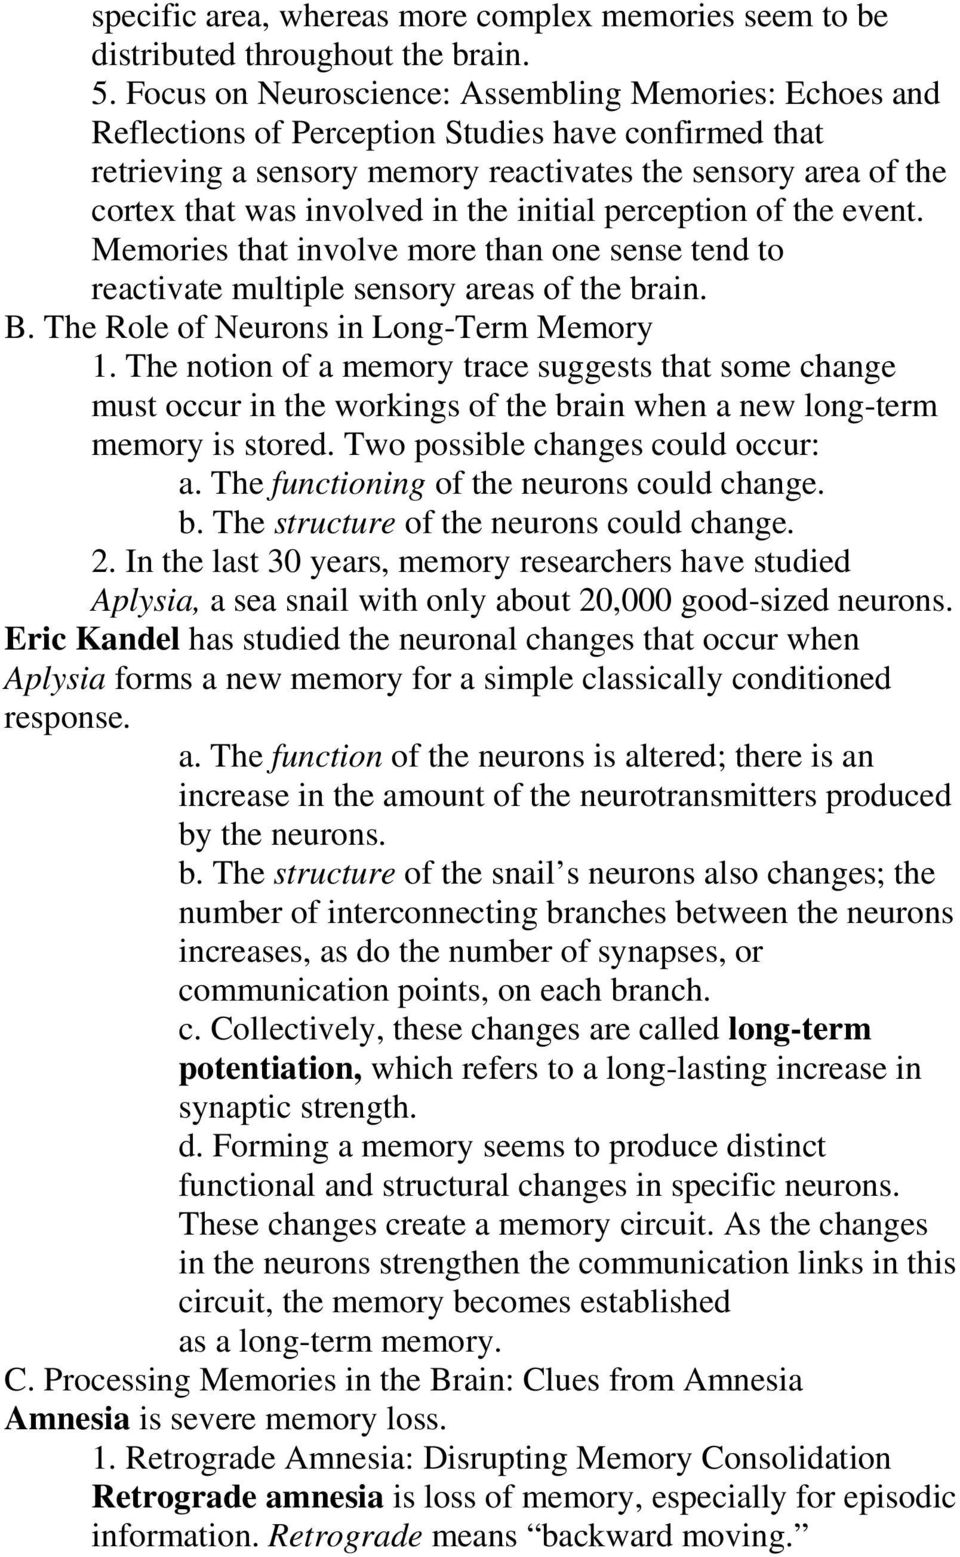 in the initial perception of the event. Memories that involve more than one sense tend to reactivate multiple sensory areas of the brain. B. The Role of Neurons in Long-Term Memory 1.